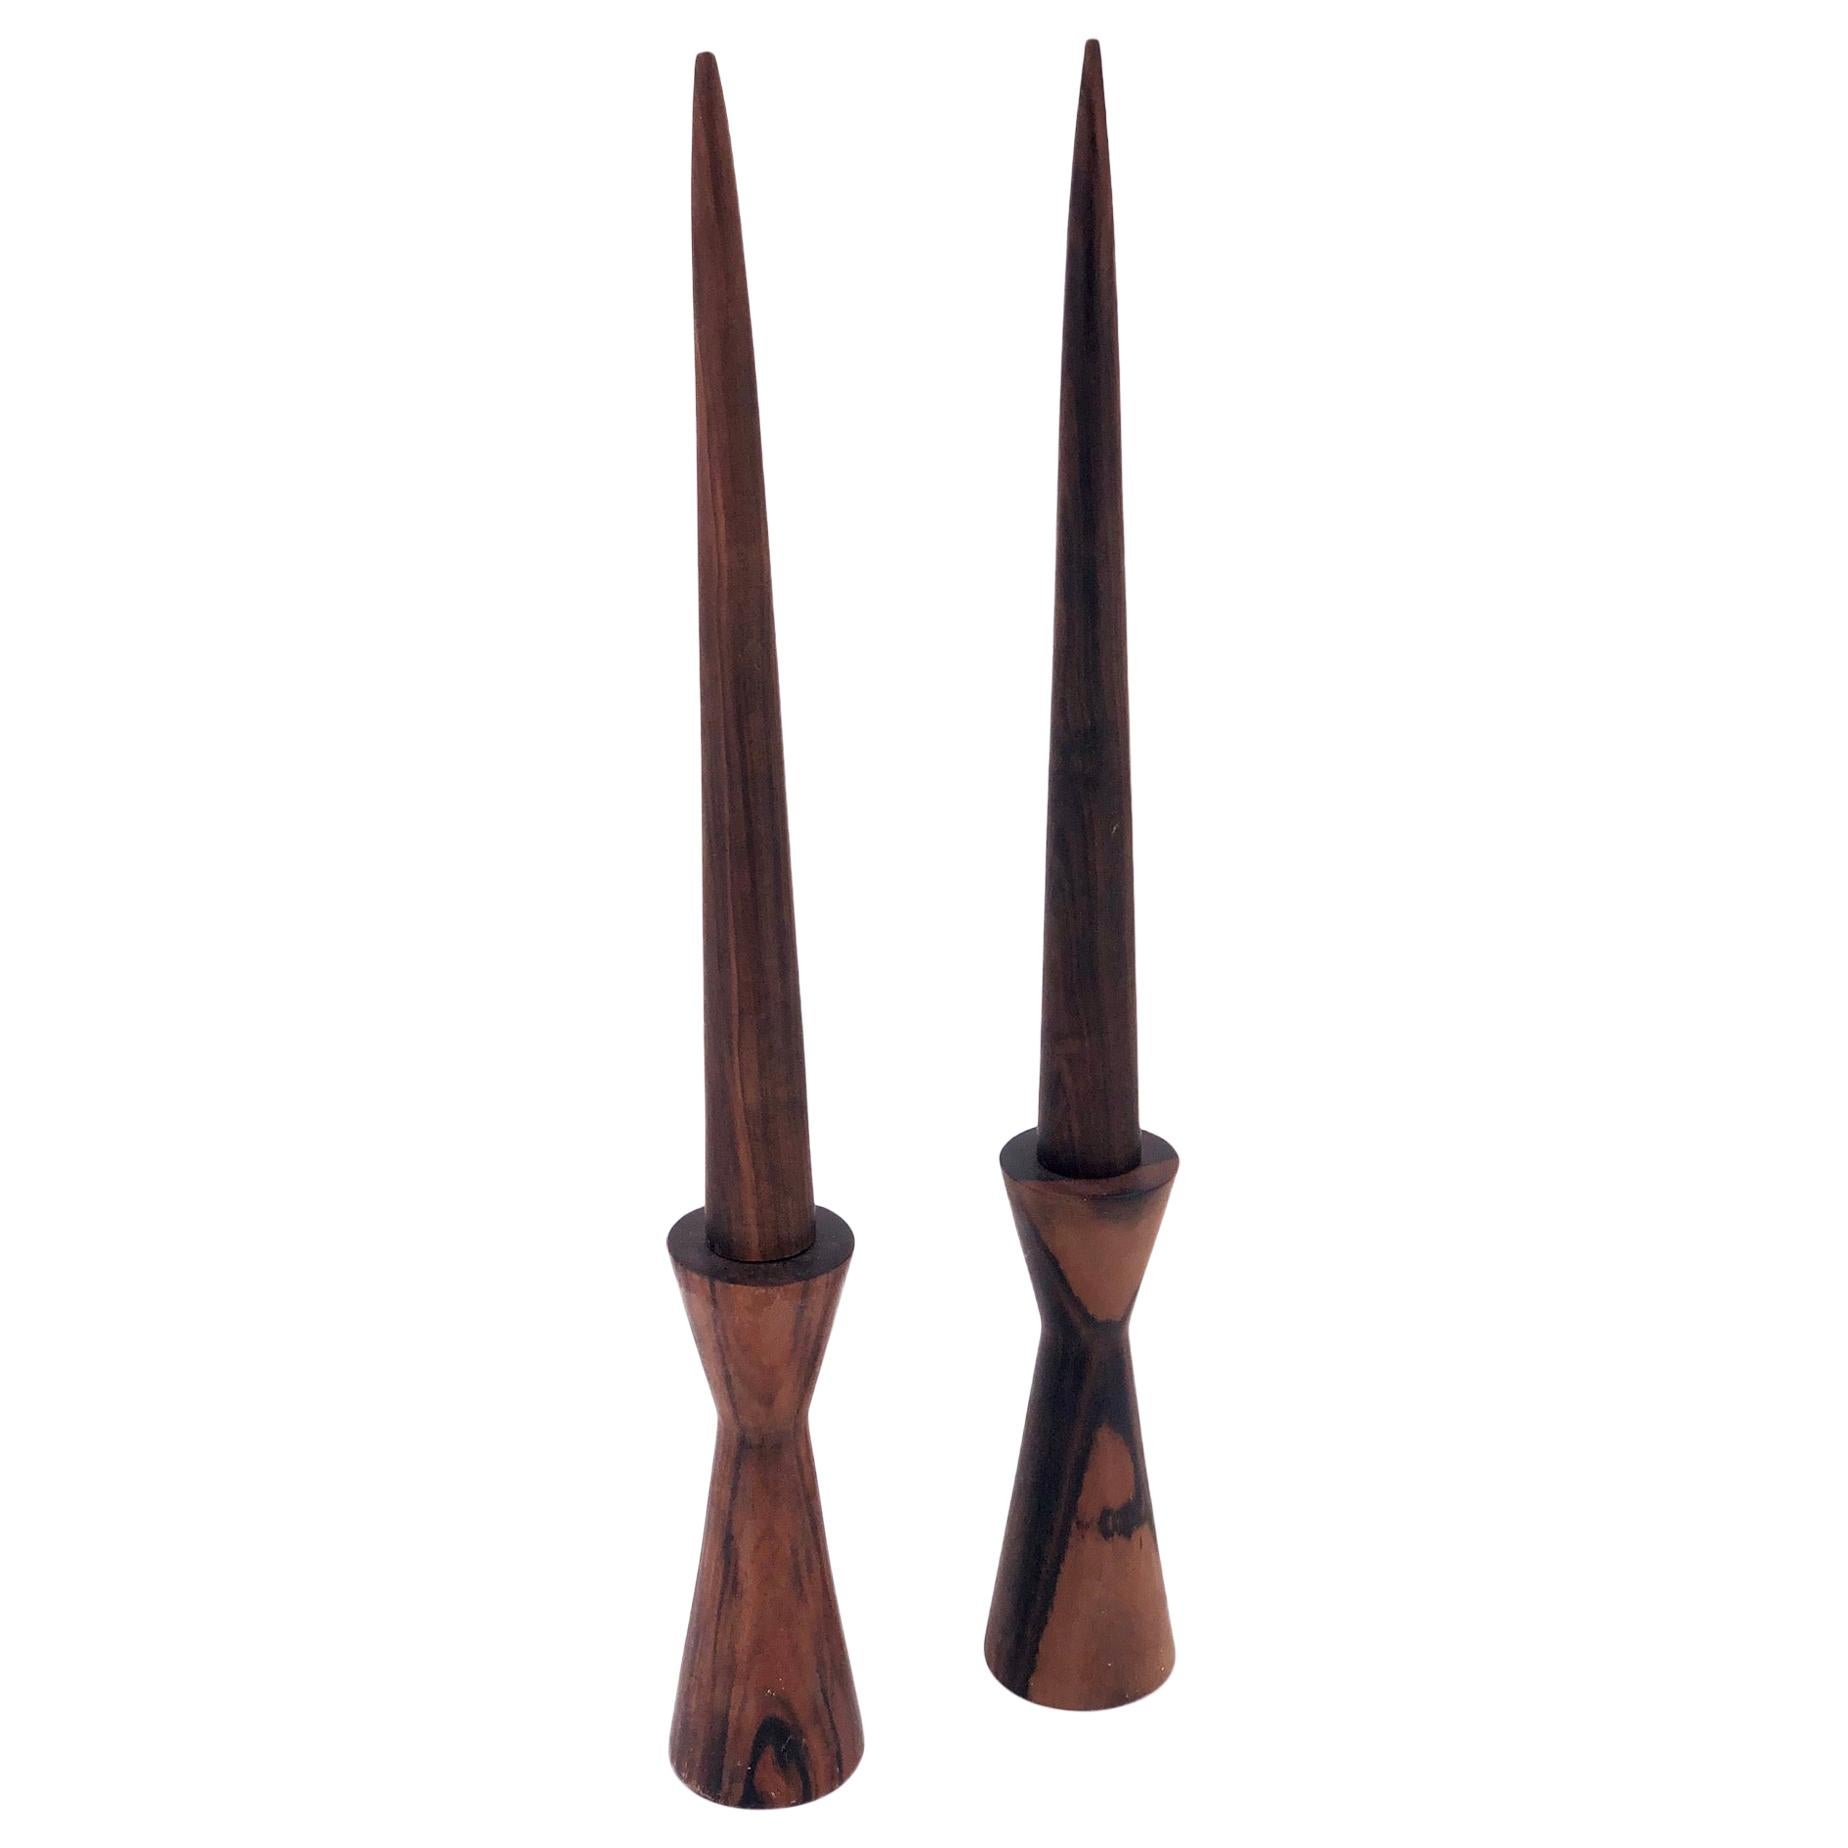 Pair of Danish Modern Solid Rosewood Candlesticks Hand Turned